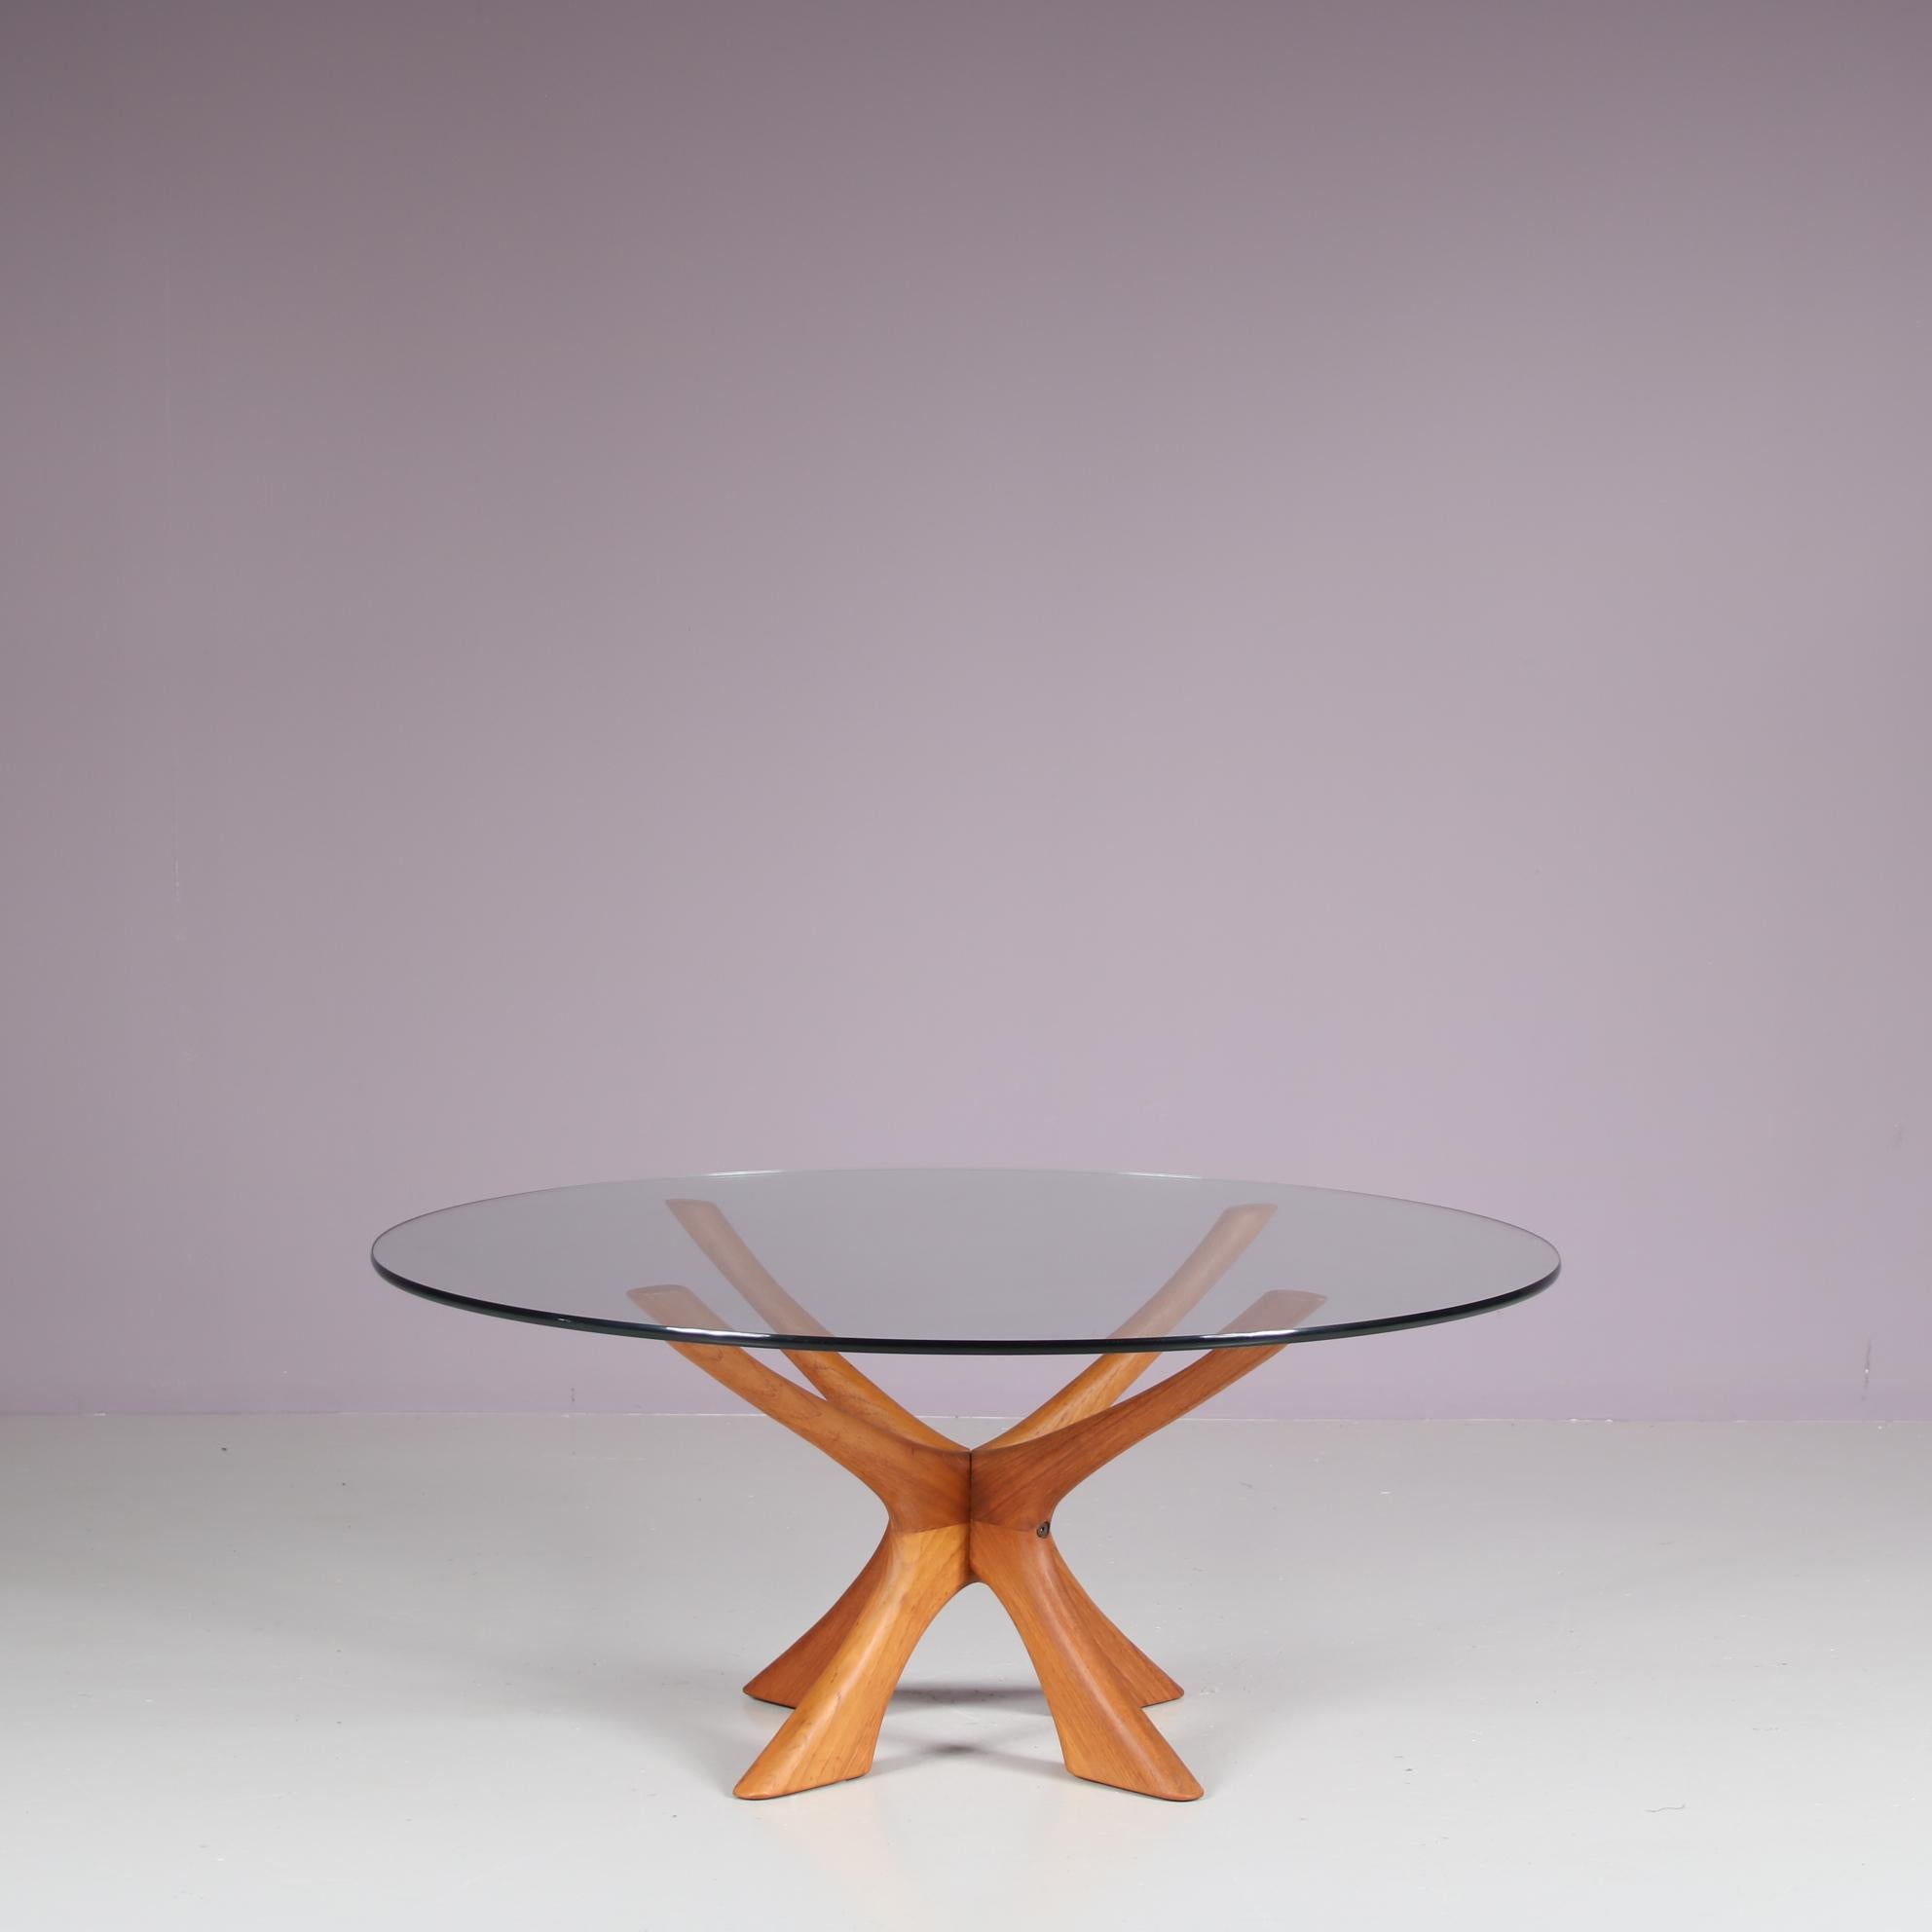 A 1960s Coffee table, model “T118,” designed by Illum Wikkelso and manufactured by Niels Eilersen in Denmark.

This stunning coffee table showcases the impeccable craftsmanship and timeless design aesthetics that Danish furniture is renowned for.